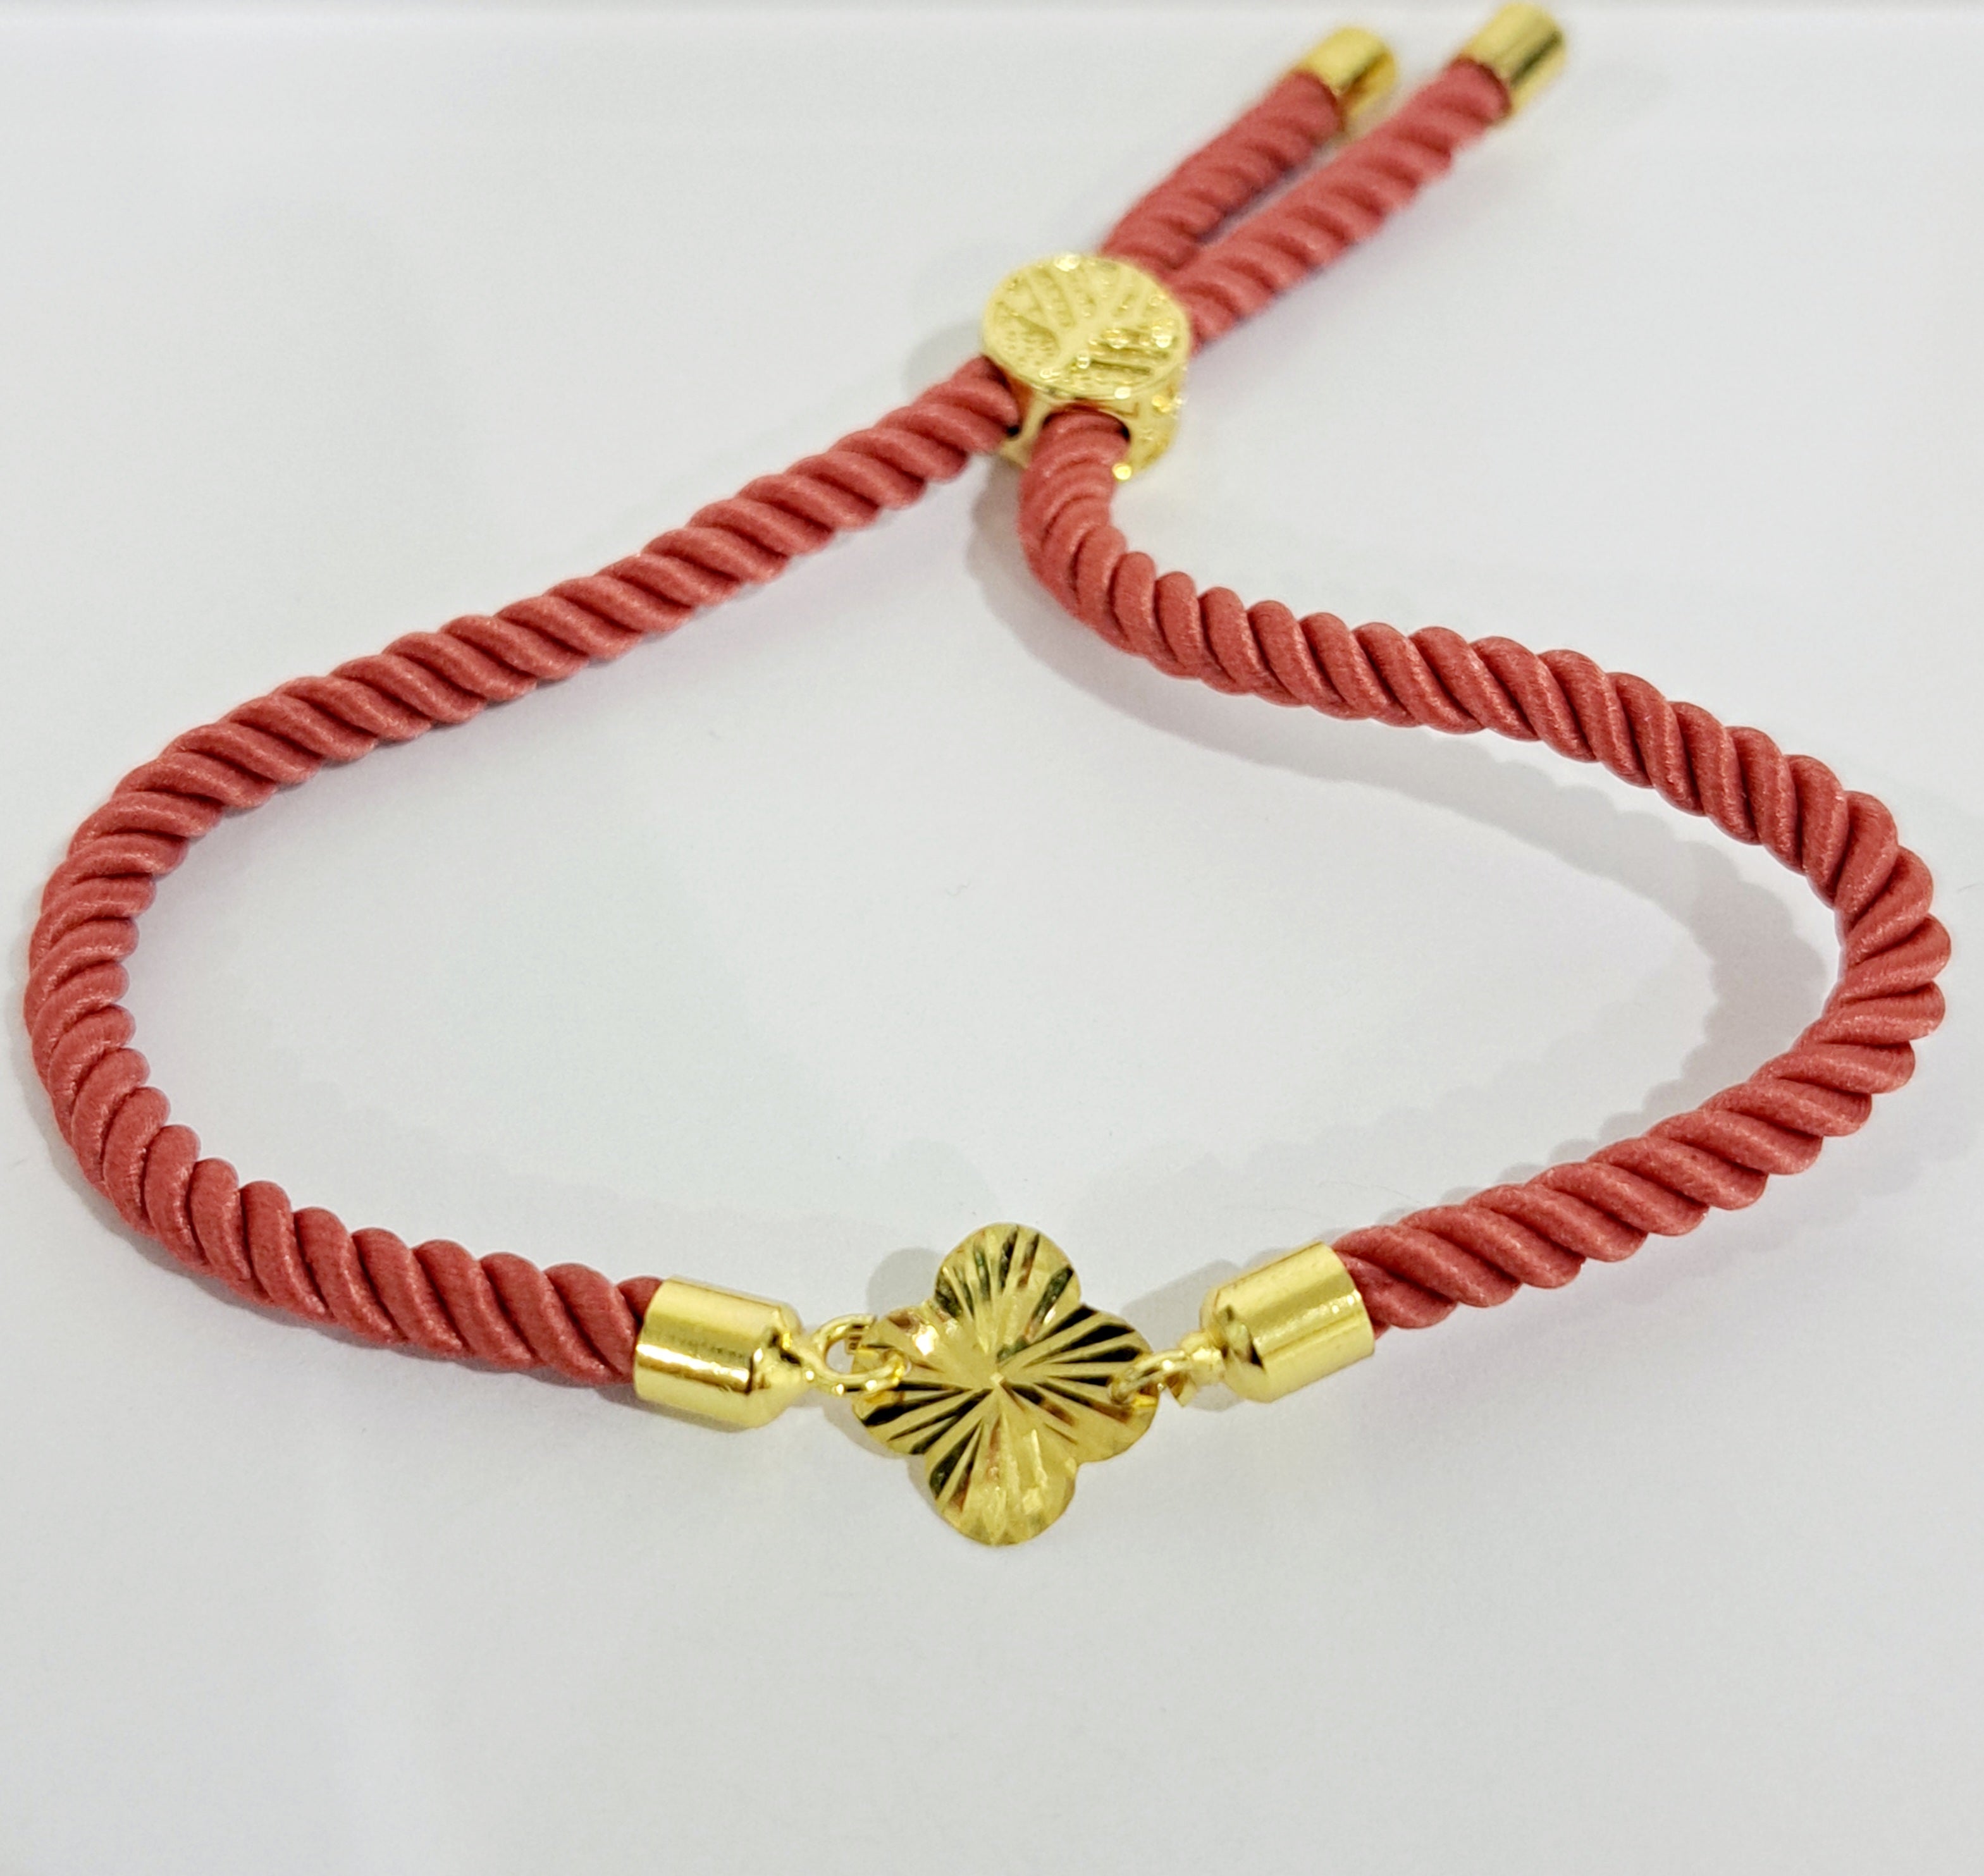 Buy 14k Solid Gold Heart Silk Cord Red String Bracelet Online in India 